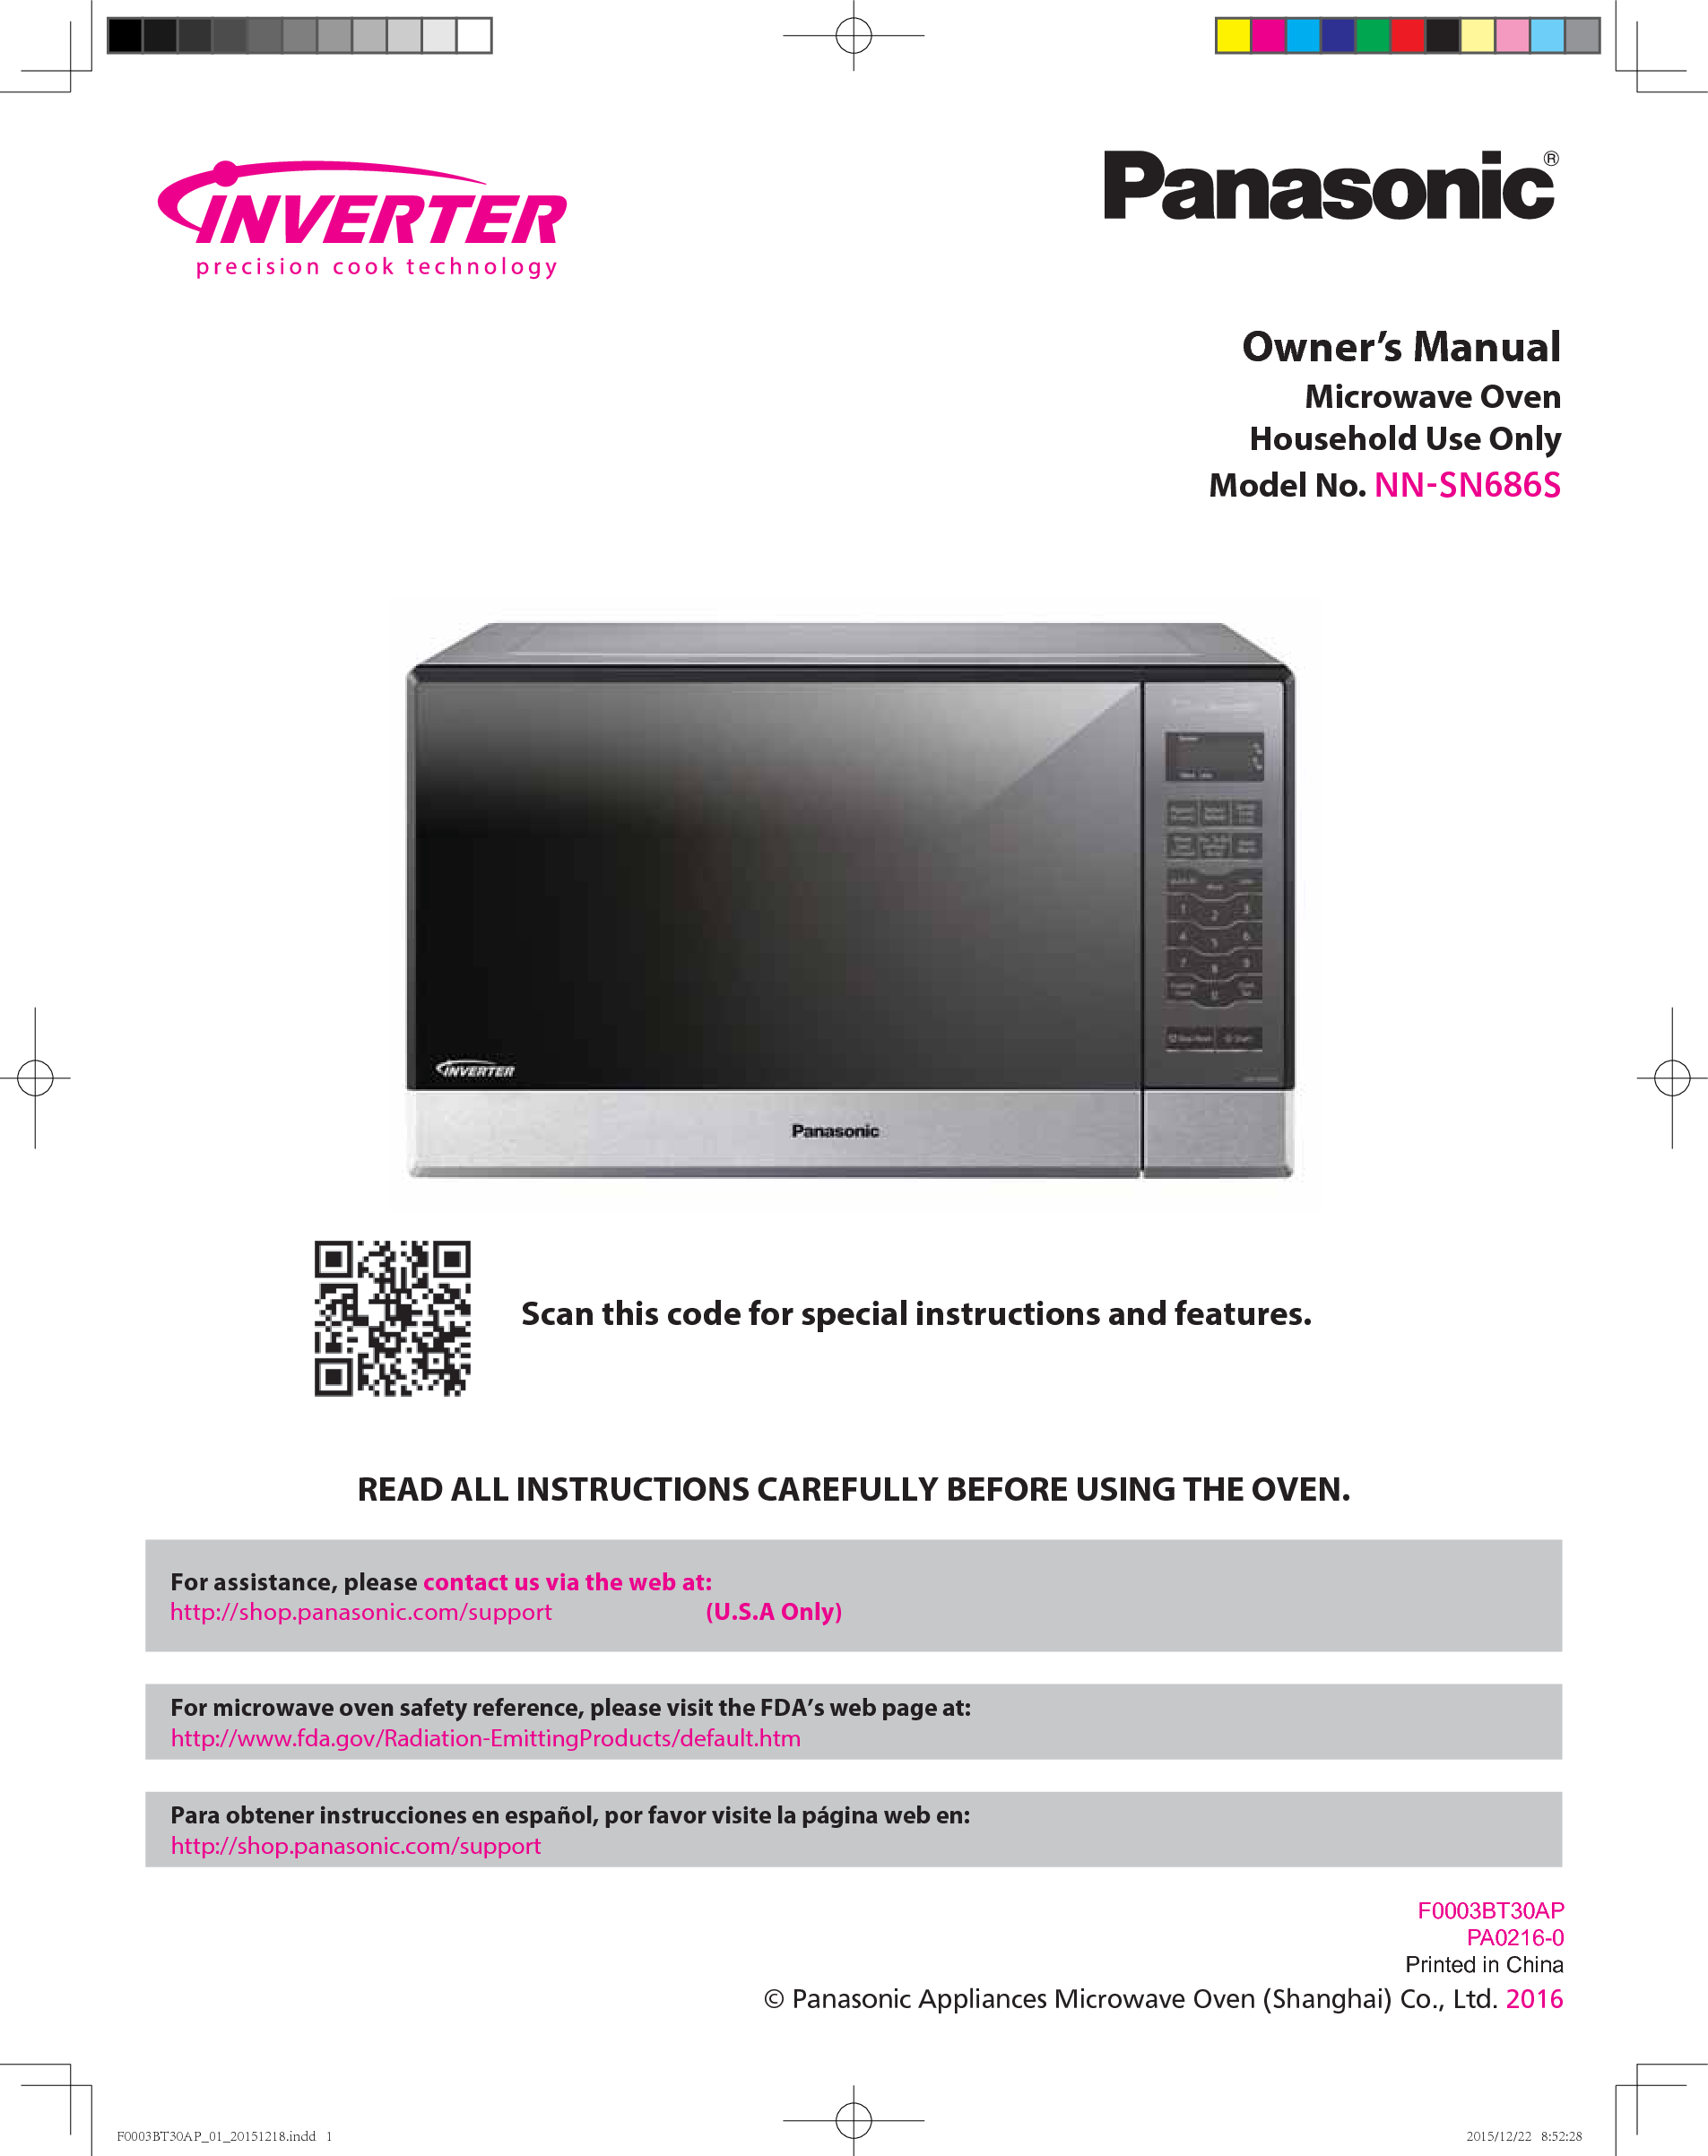 Owner’s ManualMicrowave OvenHousehold Use OnlyModel No. NN-SN686SREAD ALL INSTRUCTIONS CAREFULLY BEFORE USING THE OVEN.Scan this code for special instructions and features.  For assistance, please contact us via the web at:     http://shop.panasonic.com/support                           (U.S.A Only)  For microwave oven safety reference, please visit the FDA’s web page at: http://www.fda.gov/Radiation-EmittingProducts/default.htm  Para obtener instrucciones en español, por favor visite la página web en: http://shop.panasonic.com/supportF0003BT30APPA0216-0Printed in China© Panasonic Appliances Microwave Oven (Shanghai) Co., Ltd. 2016F0003BT30AP_01_20151218.indd   1F0003BT30AP_01_20151218.indd   1 2015/12/22   8:52:282015/12/22   8:52:28